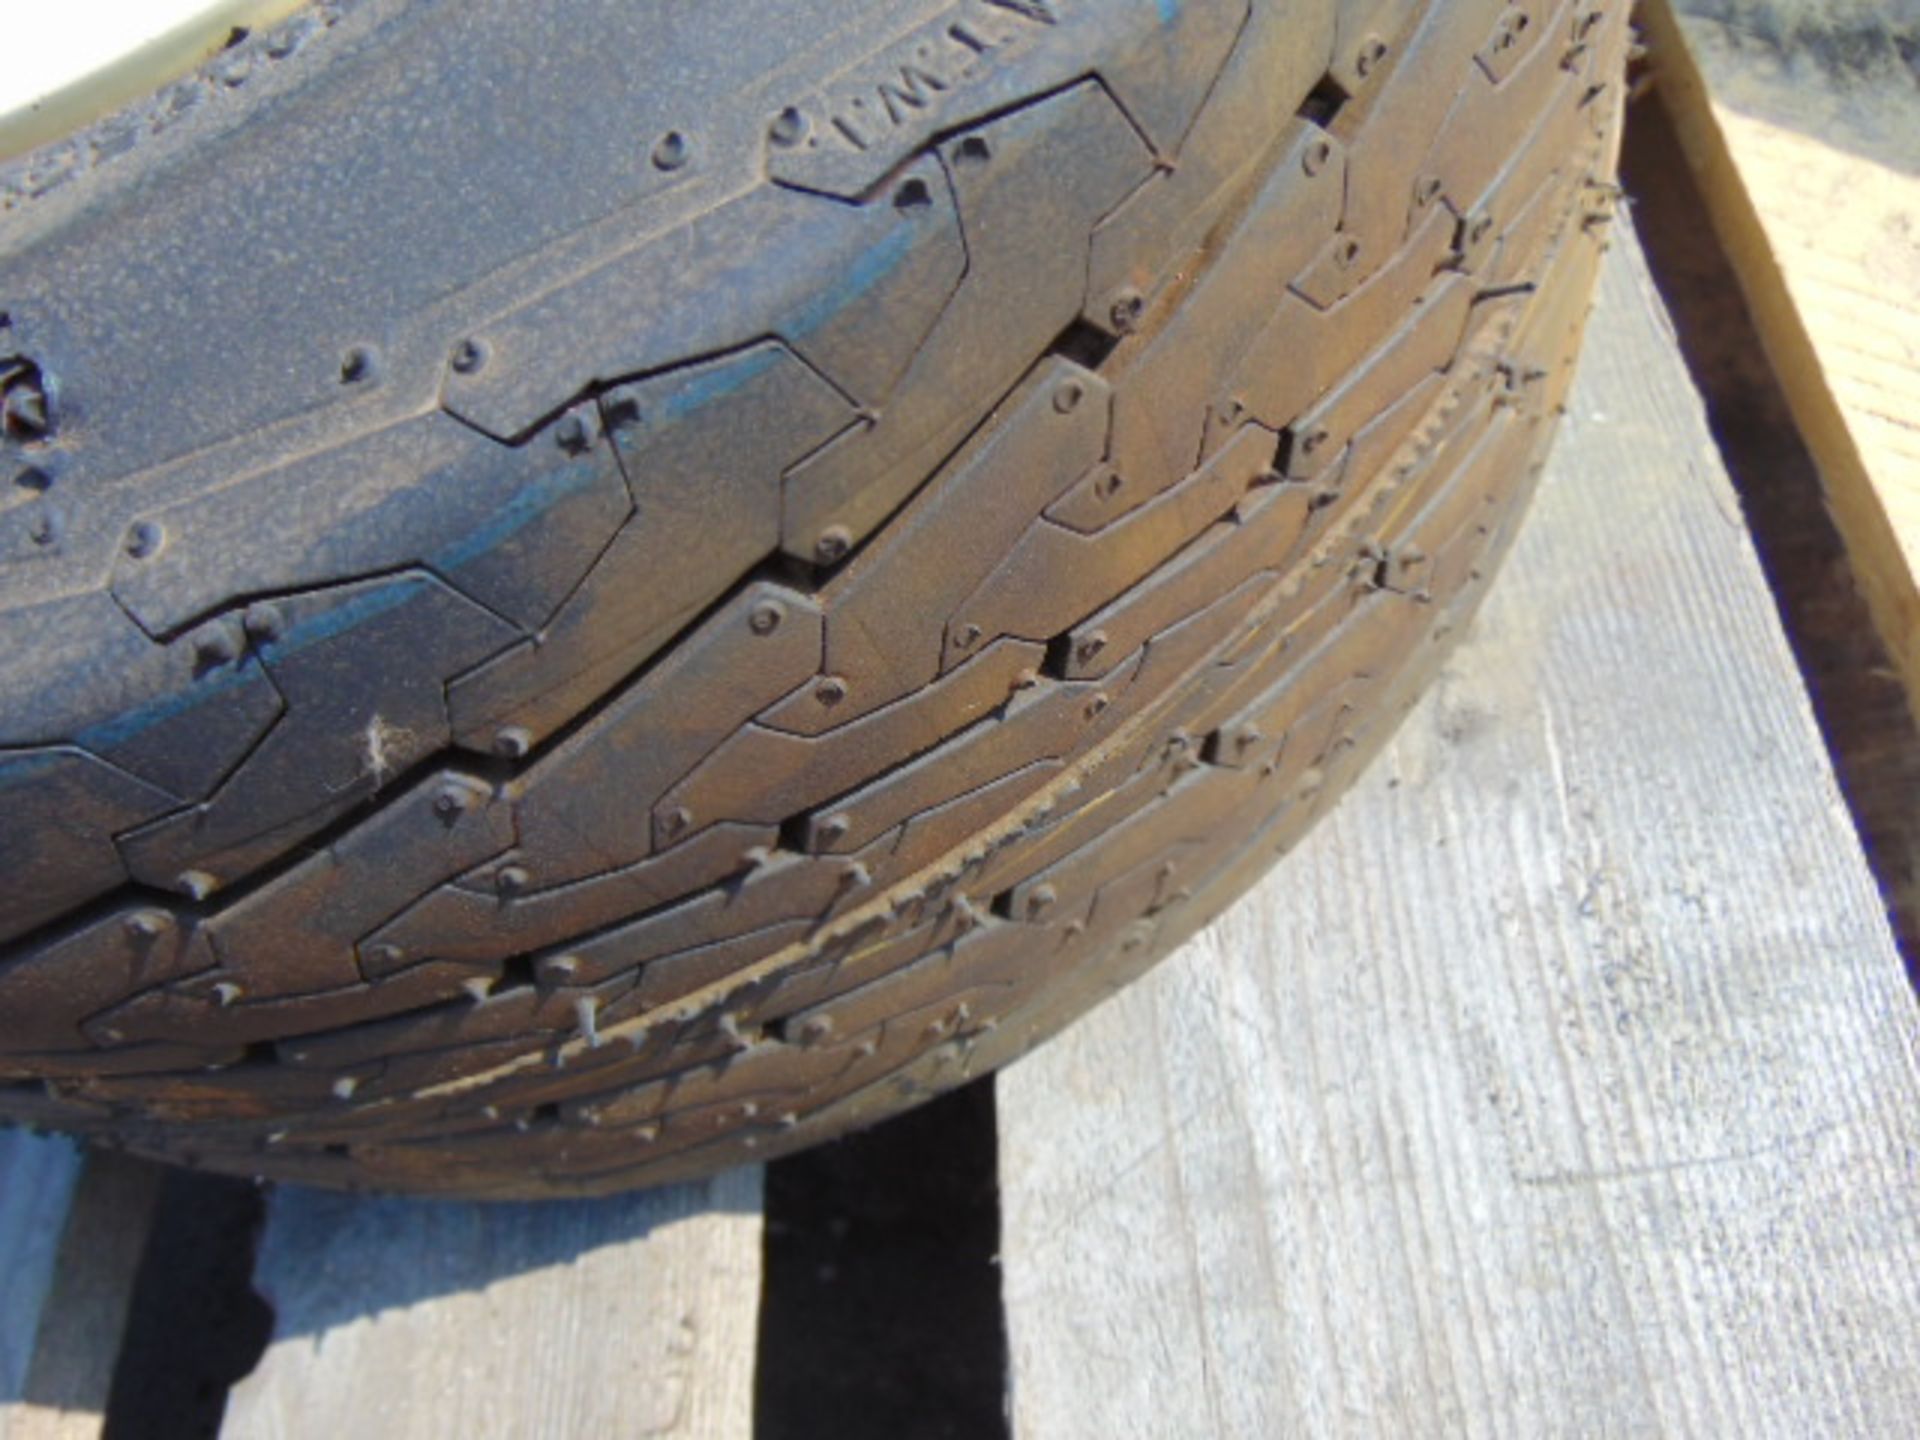 3 x Deli Tire 16.5x1.5-8 Tyres complete with 4 Stud Rims - Image 3 of 6